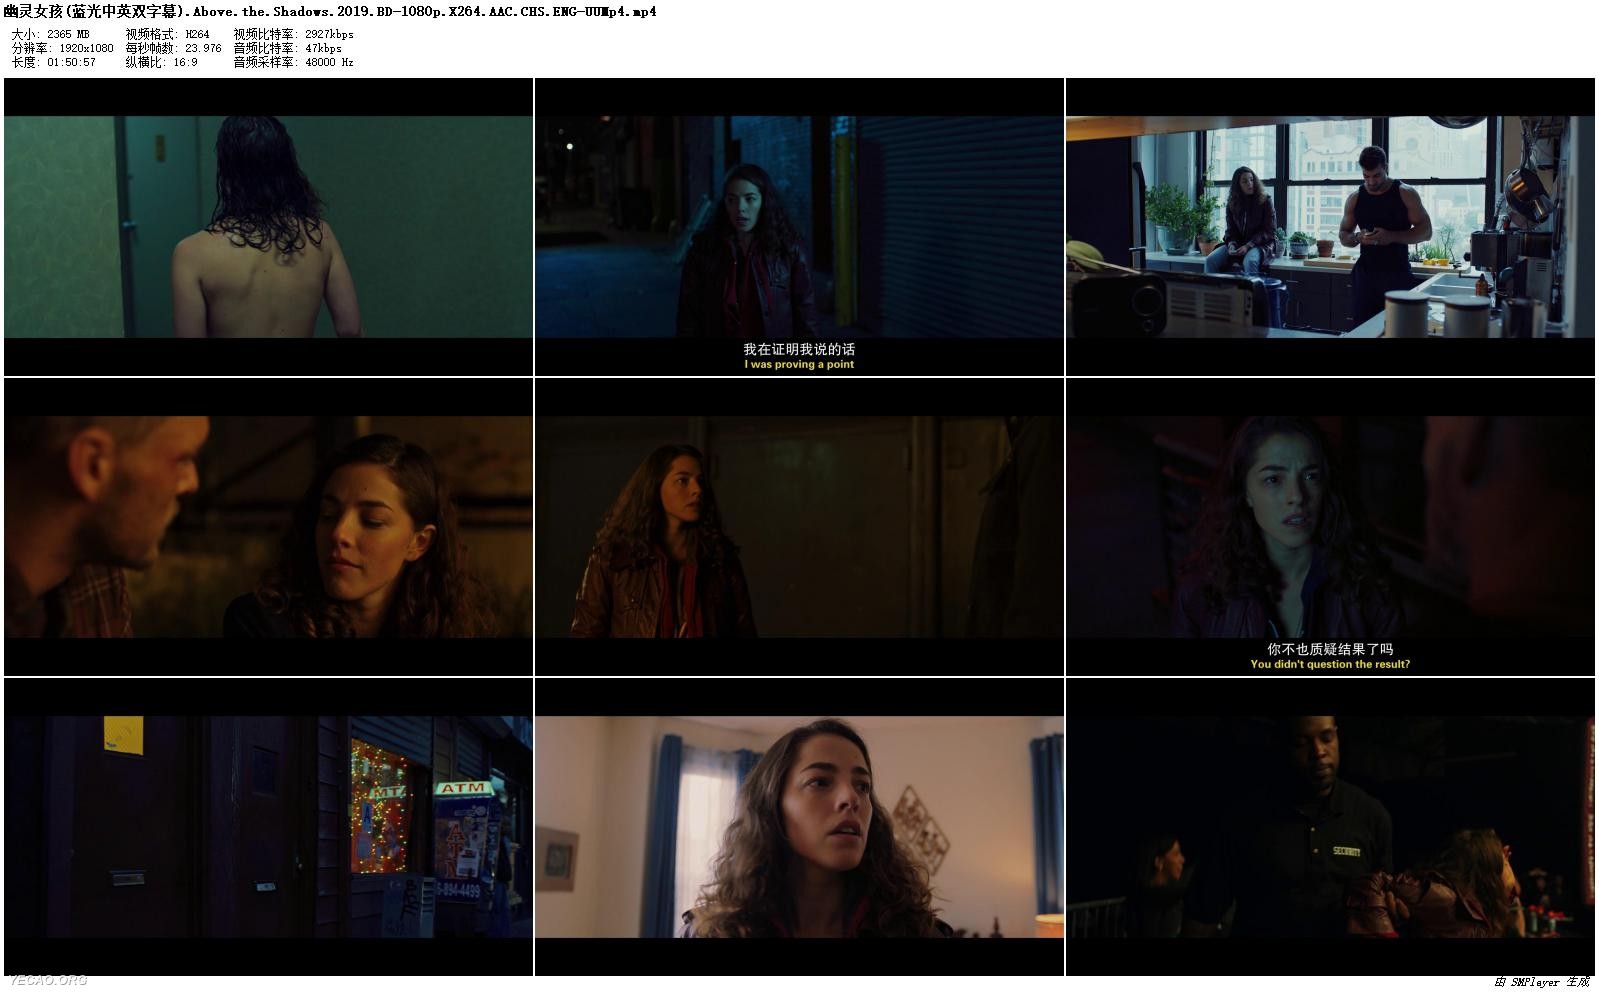 Above.the.Shadows.2019.BD-1080p.X264.AAC.CHS.ENG-UUMp4_preview.jpg